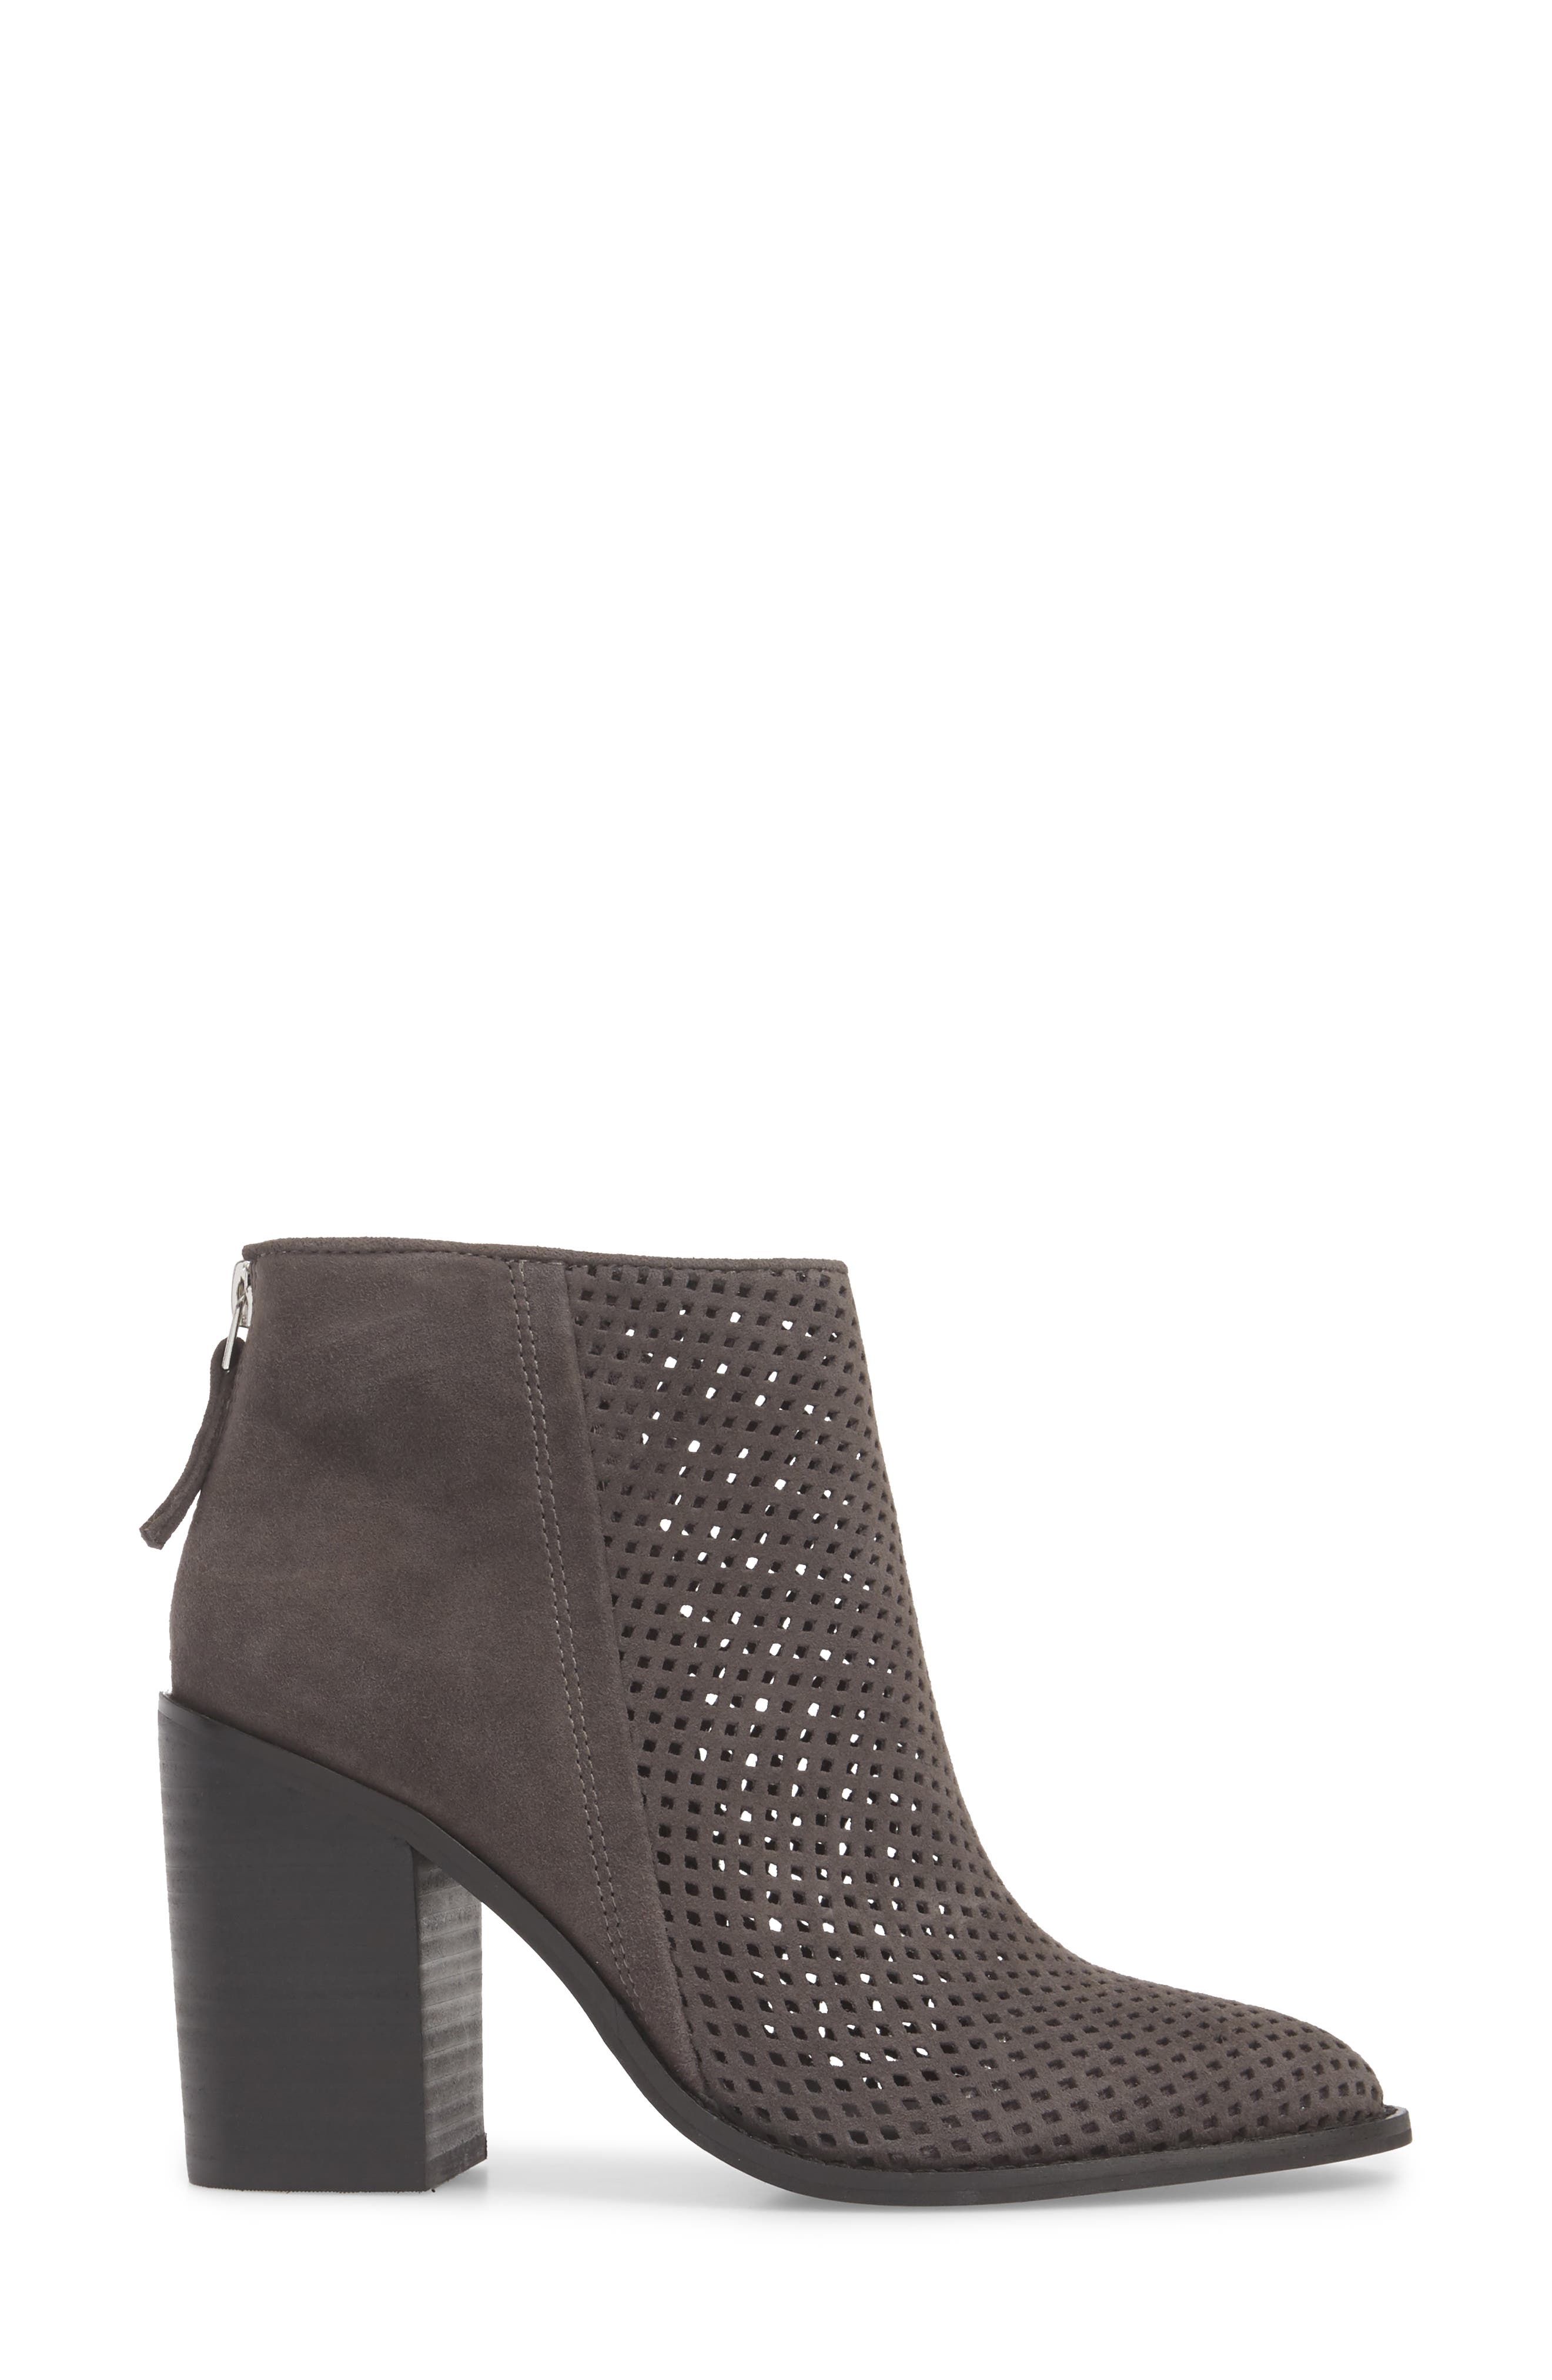 steve madden rumble perforated bootie